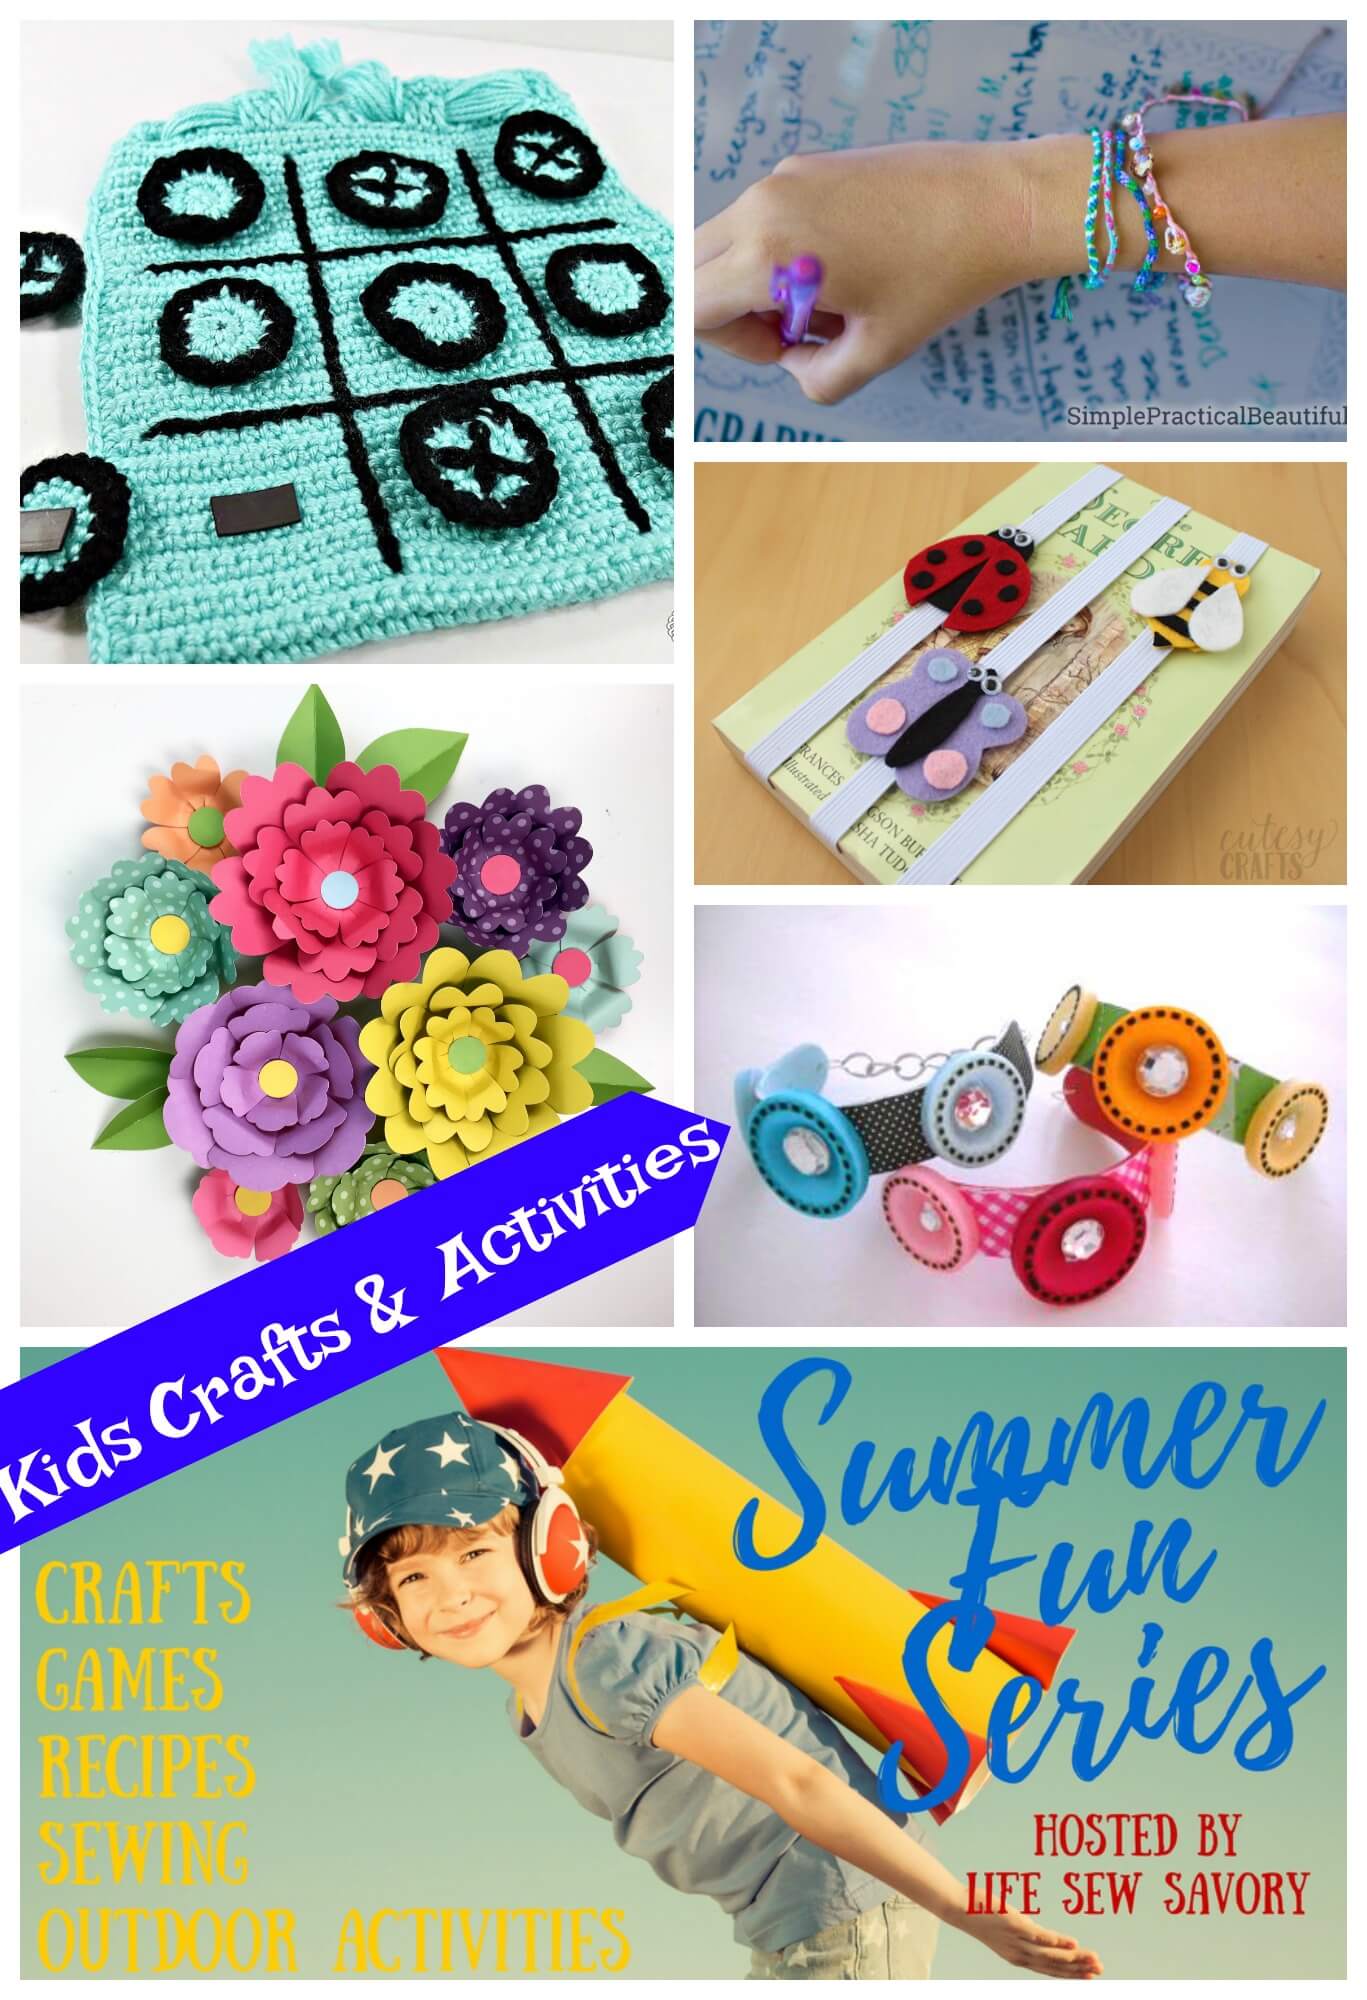 kids crafts and activities from Life Sew Savory Summer fun series